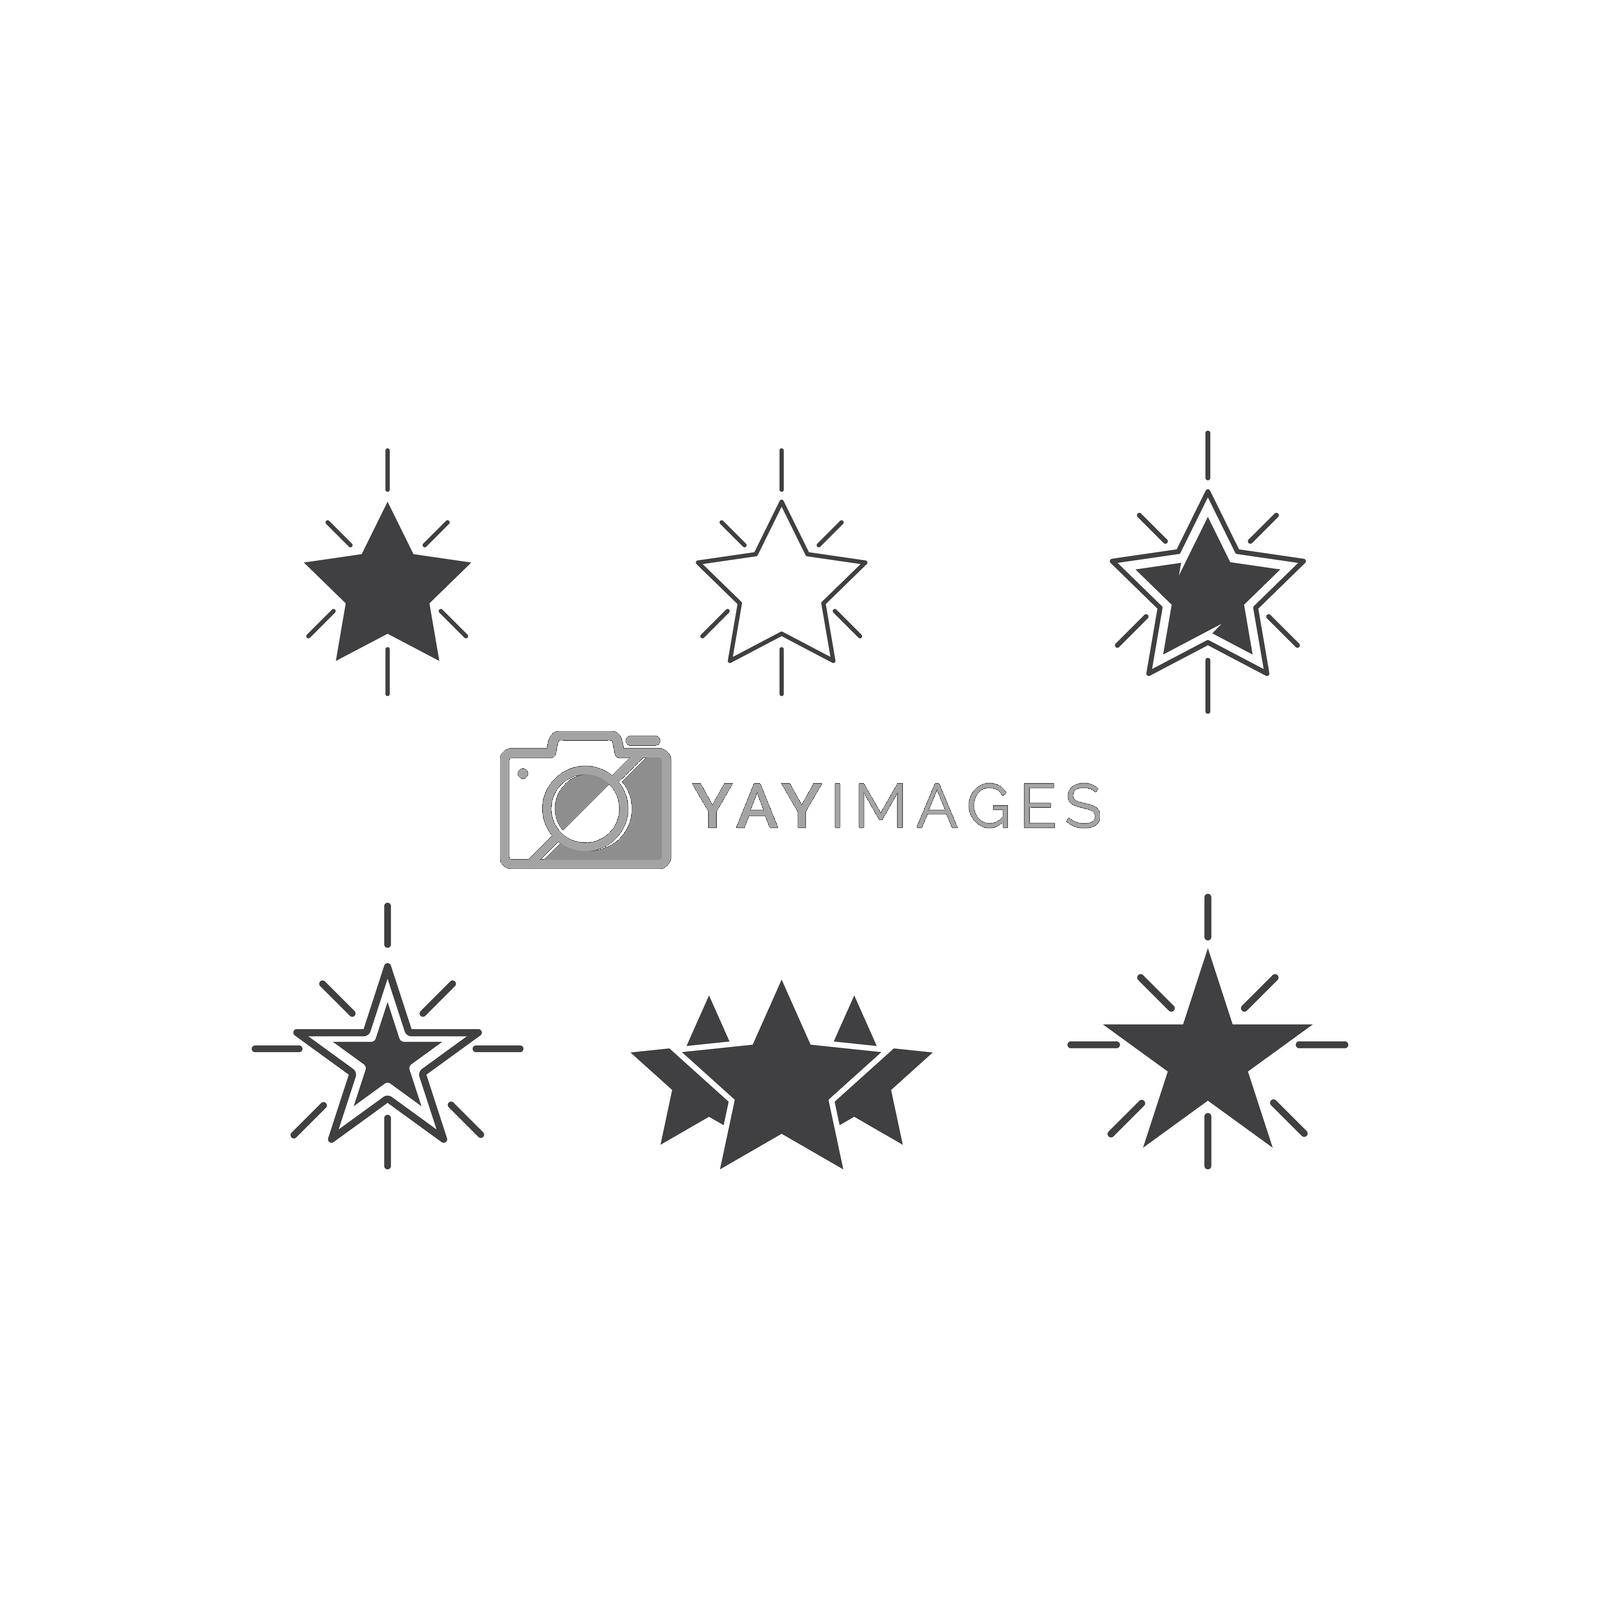 Royalty free image of Star Logo  by awk